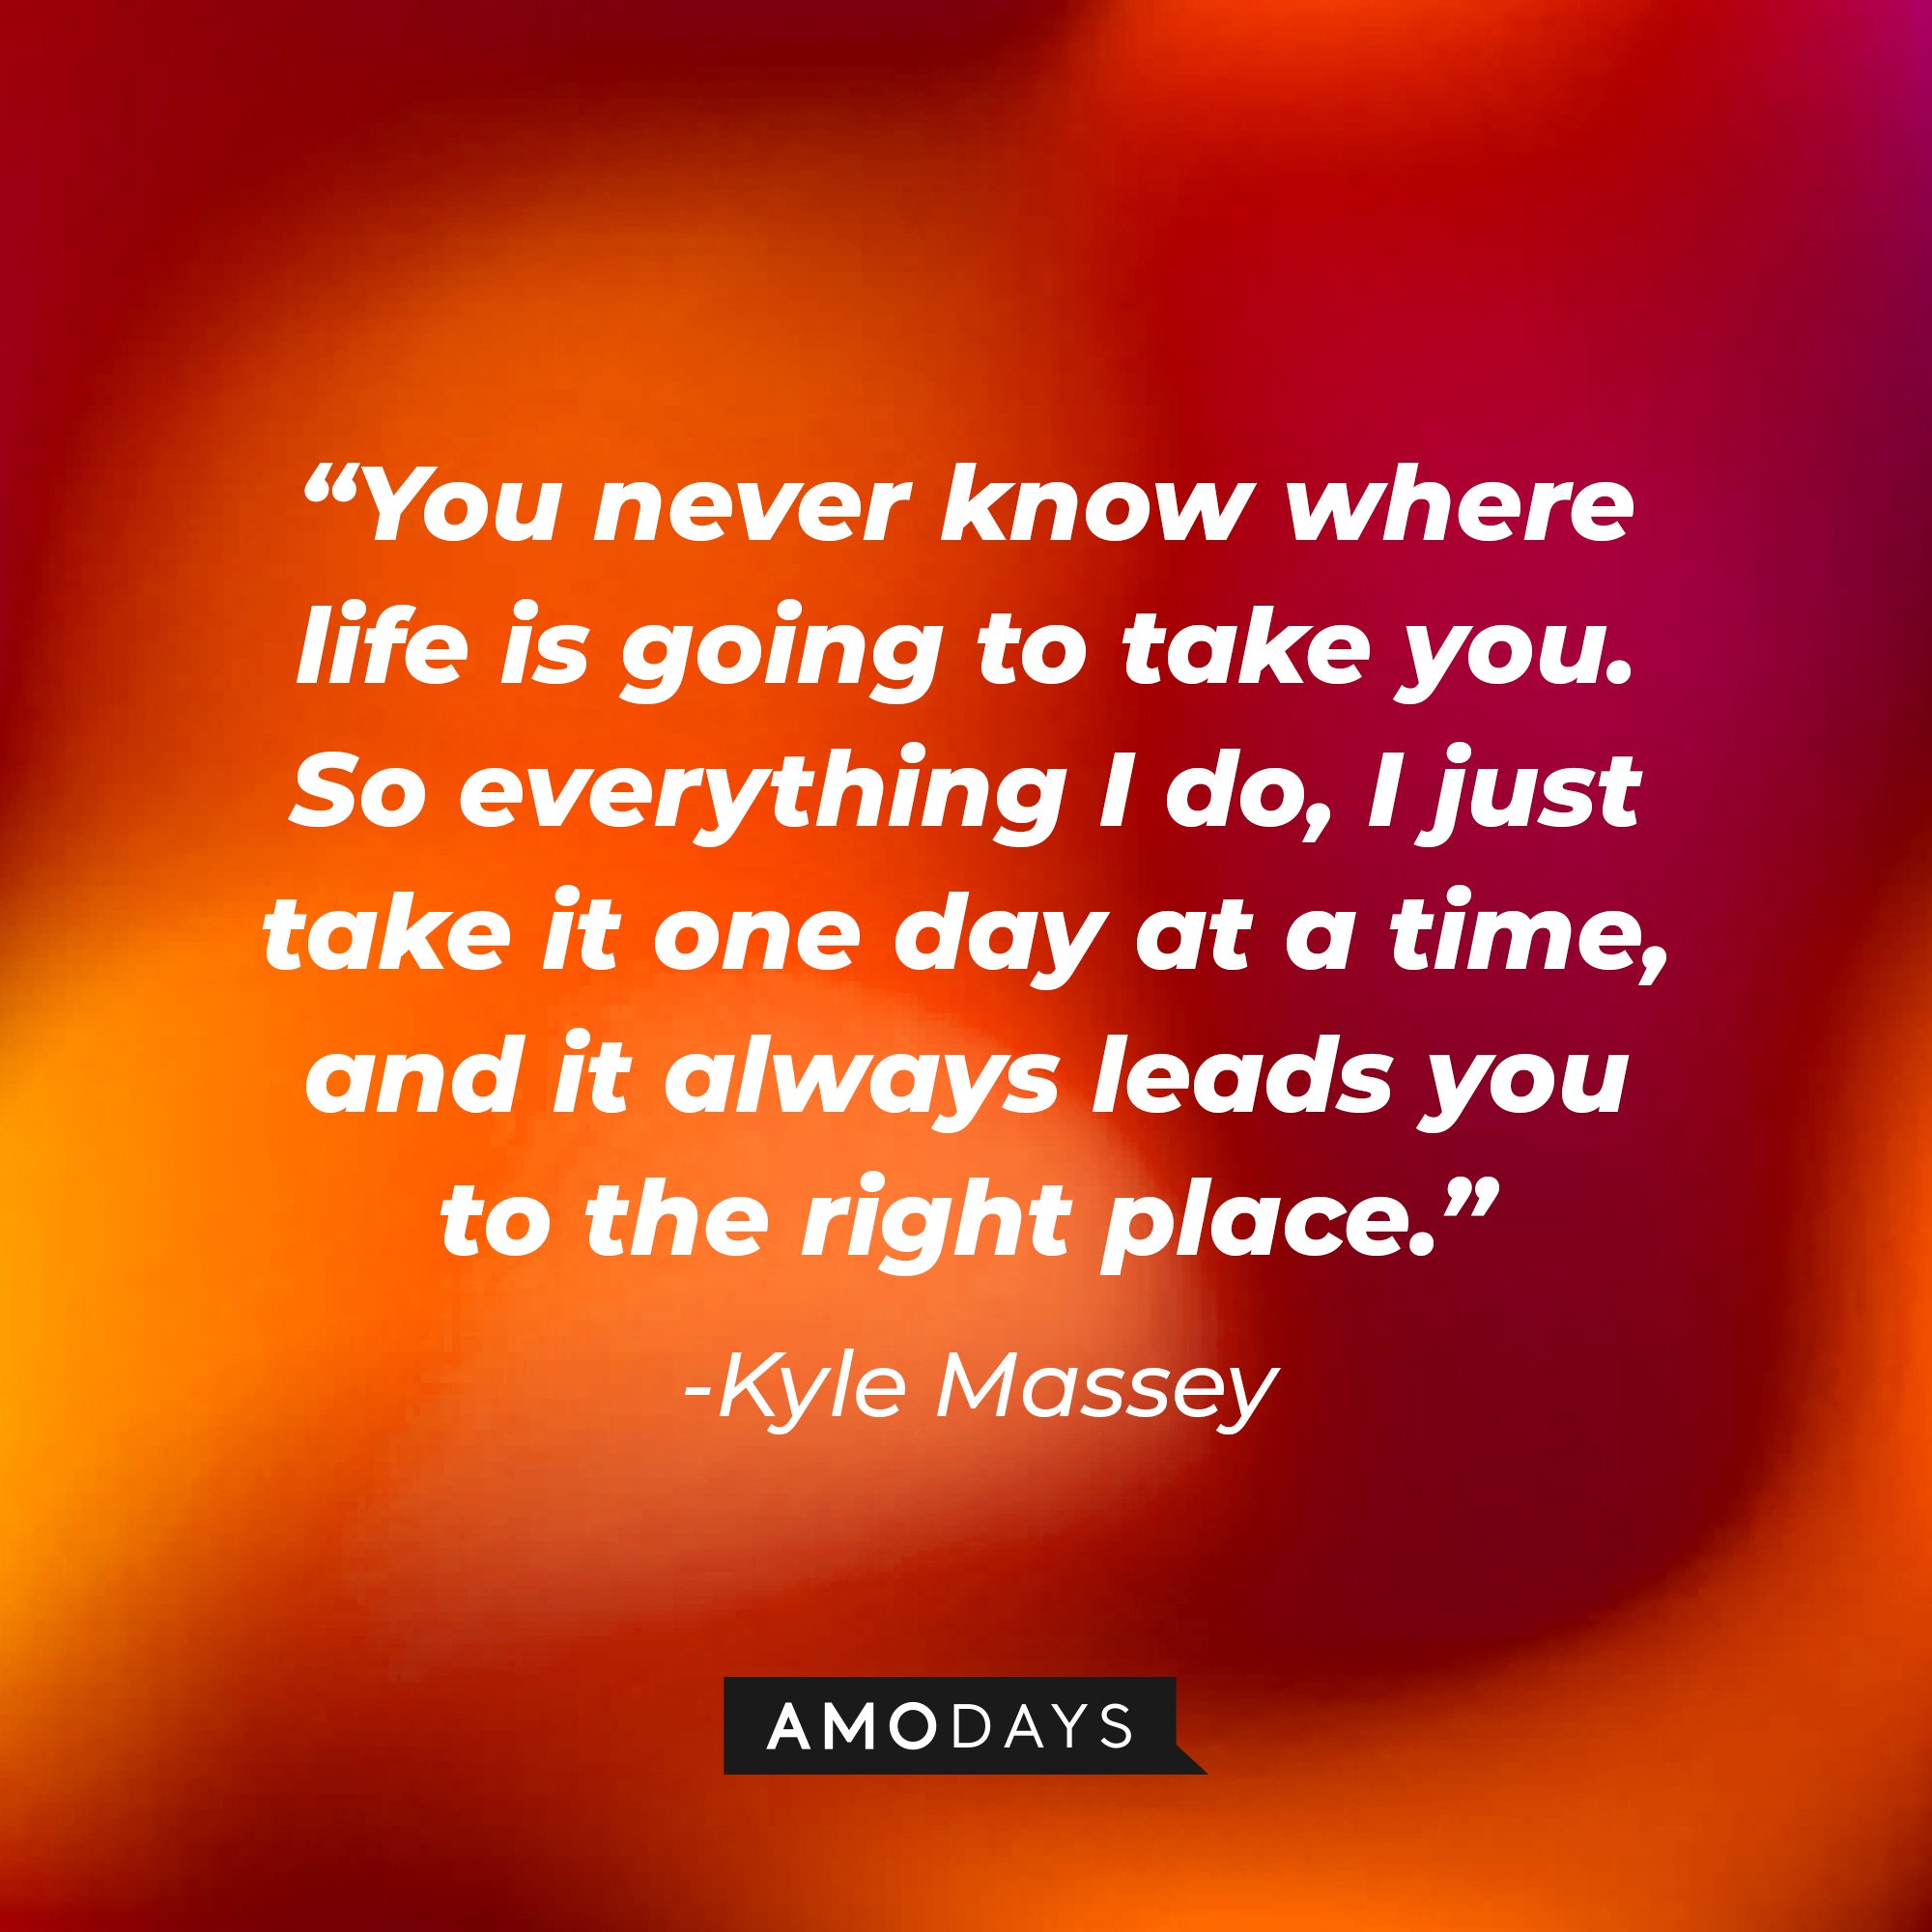 Kyle Massey's quote: "You never know where life is going to take you. So everything I do, I just take it one day at a time, and it always leads you to the right place." | Image: AmoDays